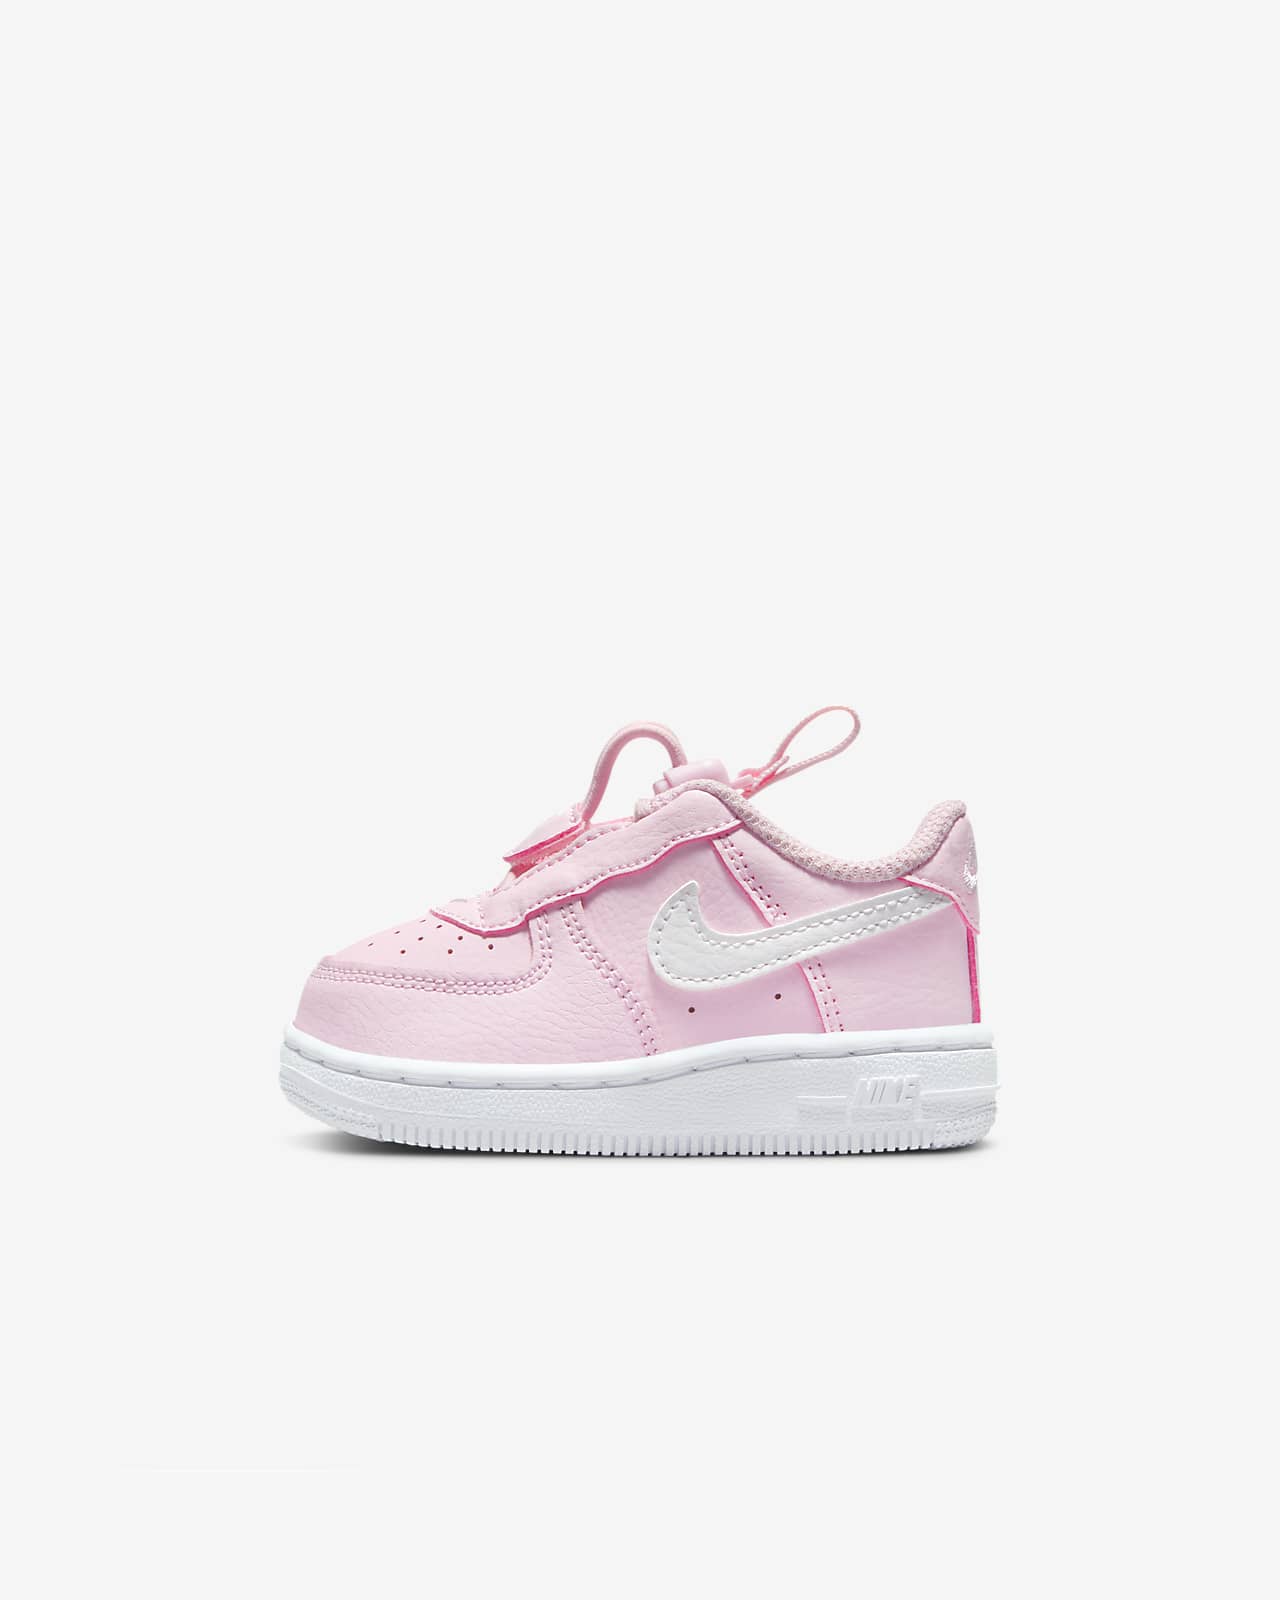 force-1-toggle-baby-toddler-shoes-hGm7GB.png